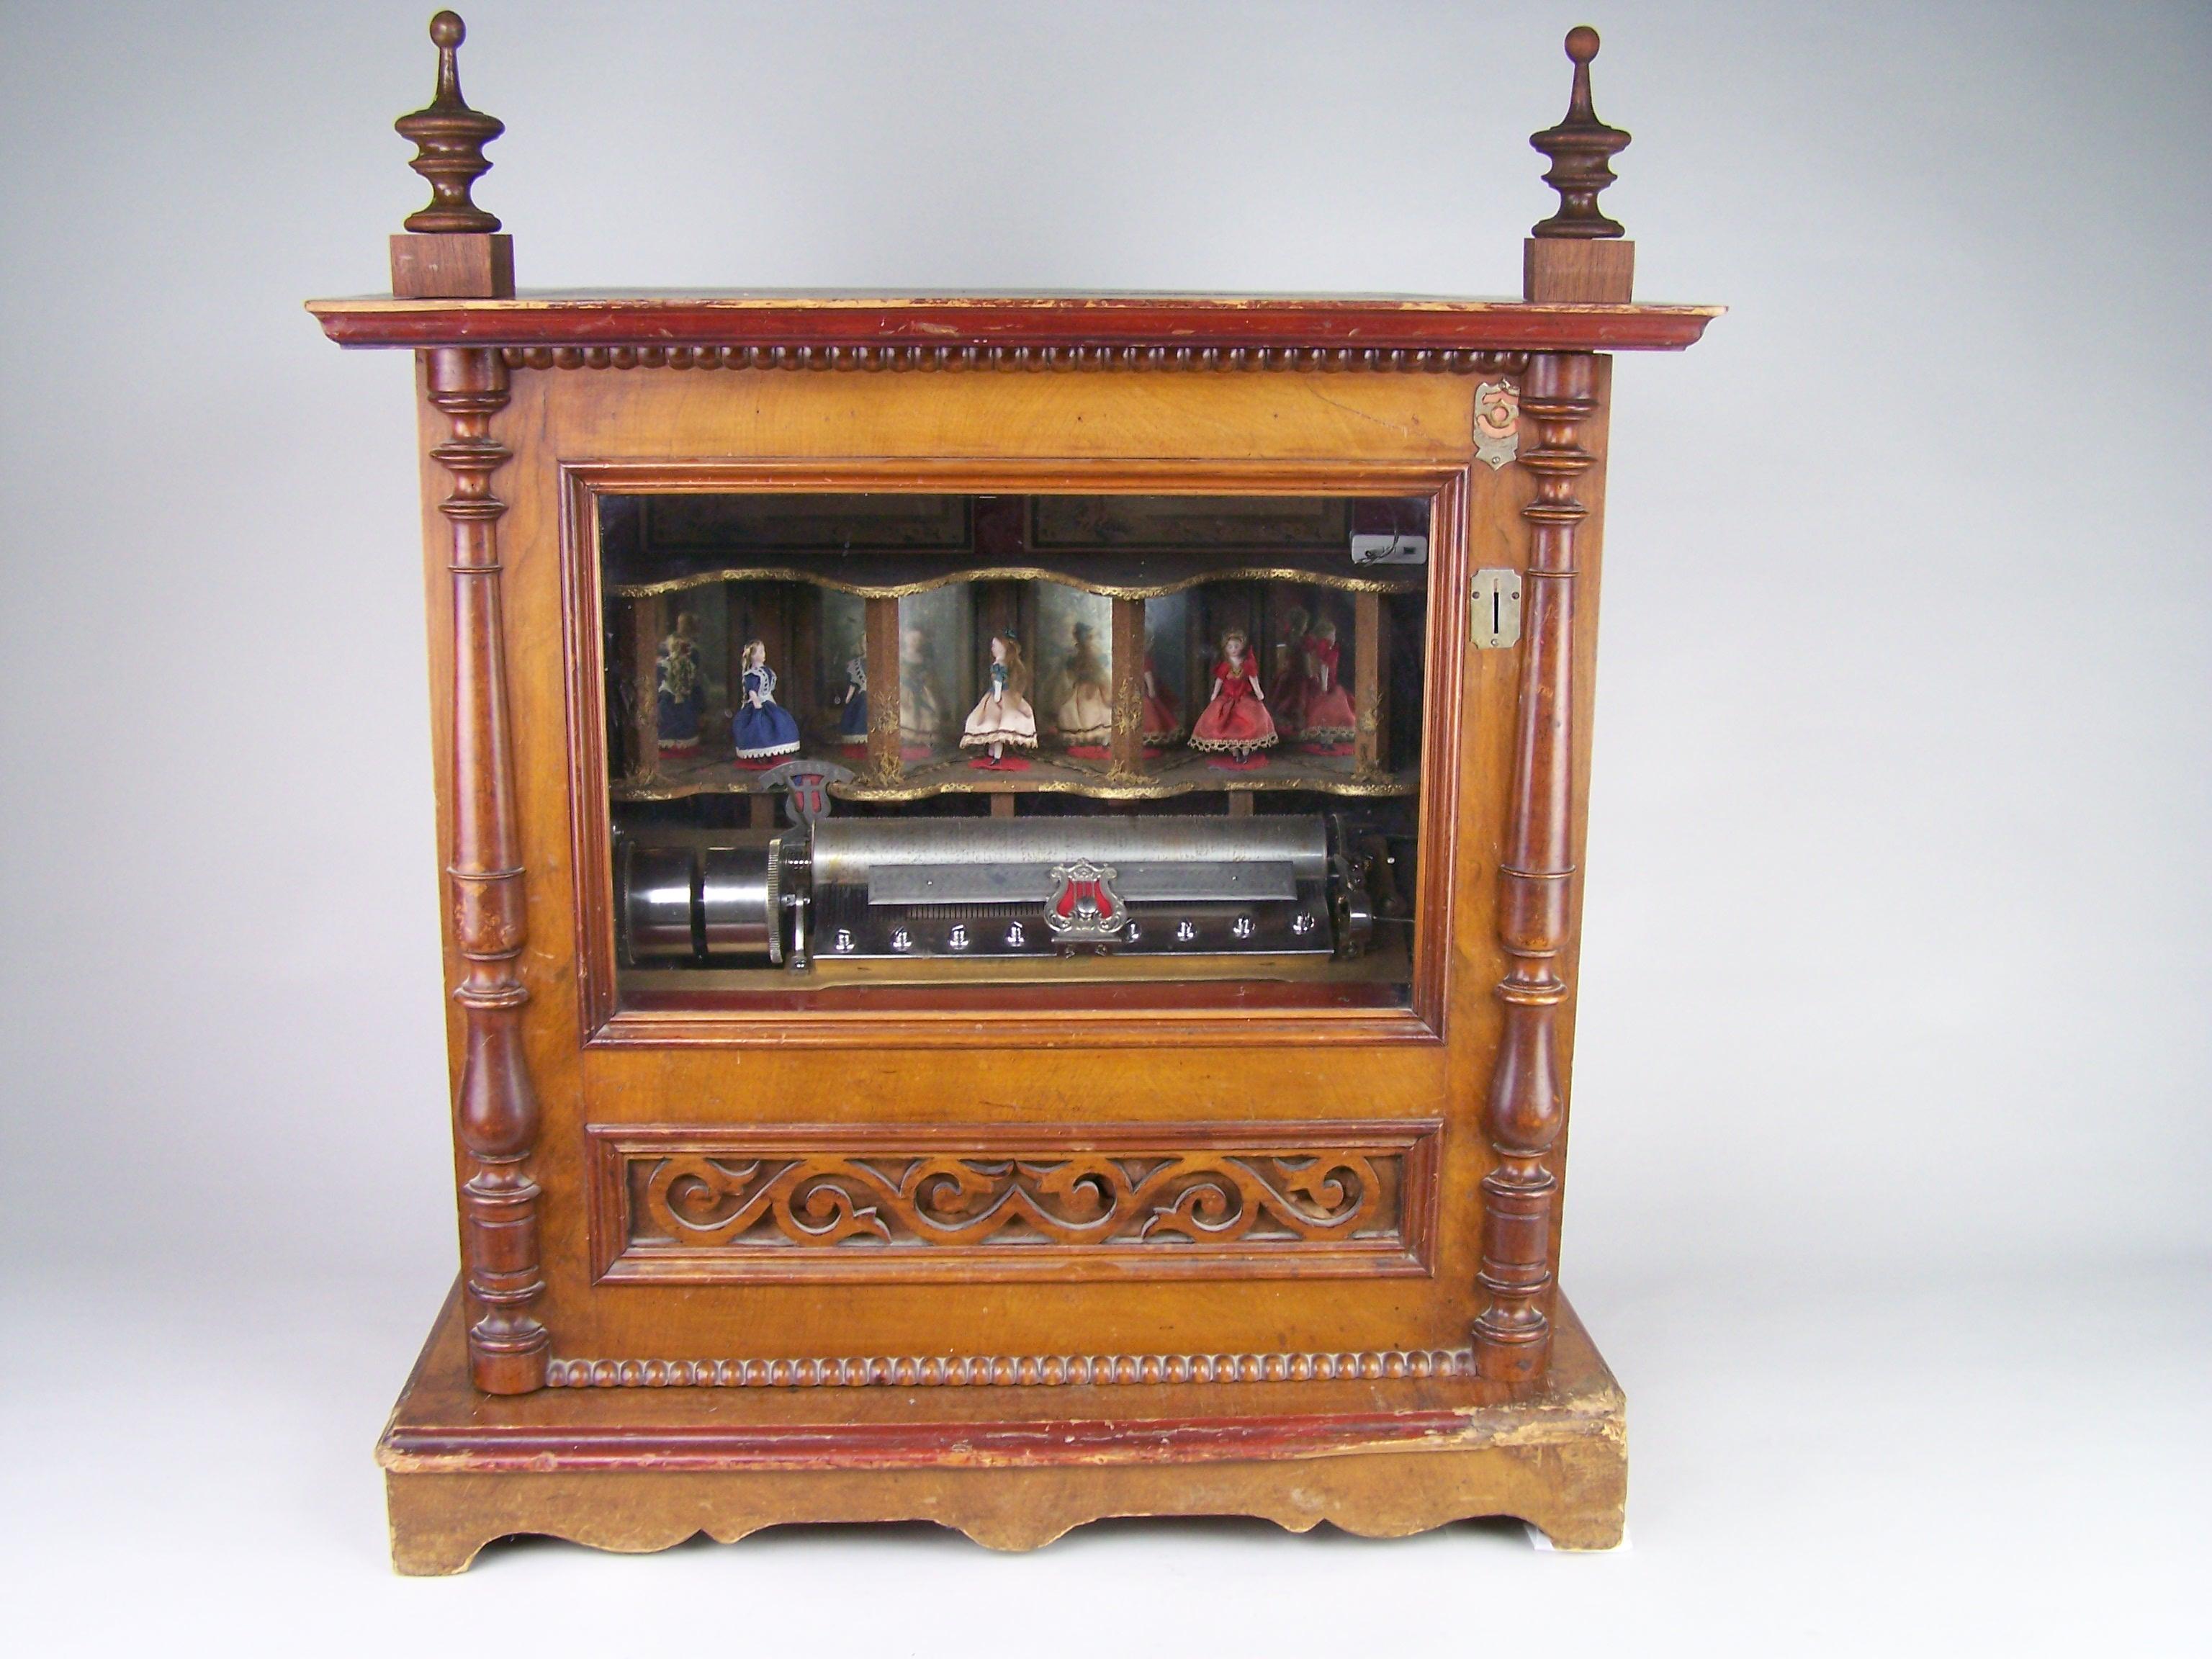 Large station music box with 3 dancing dolls.

This music box was probably made by Ullman at the end of the 19th century in Switzerland. This type of box was produced to be placed in stations, where passengers could listen to a melody and watch the